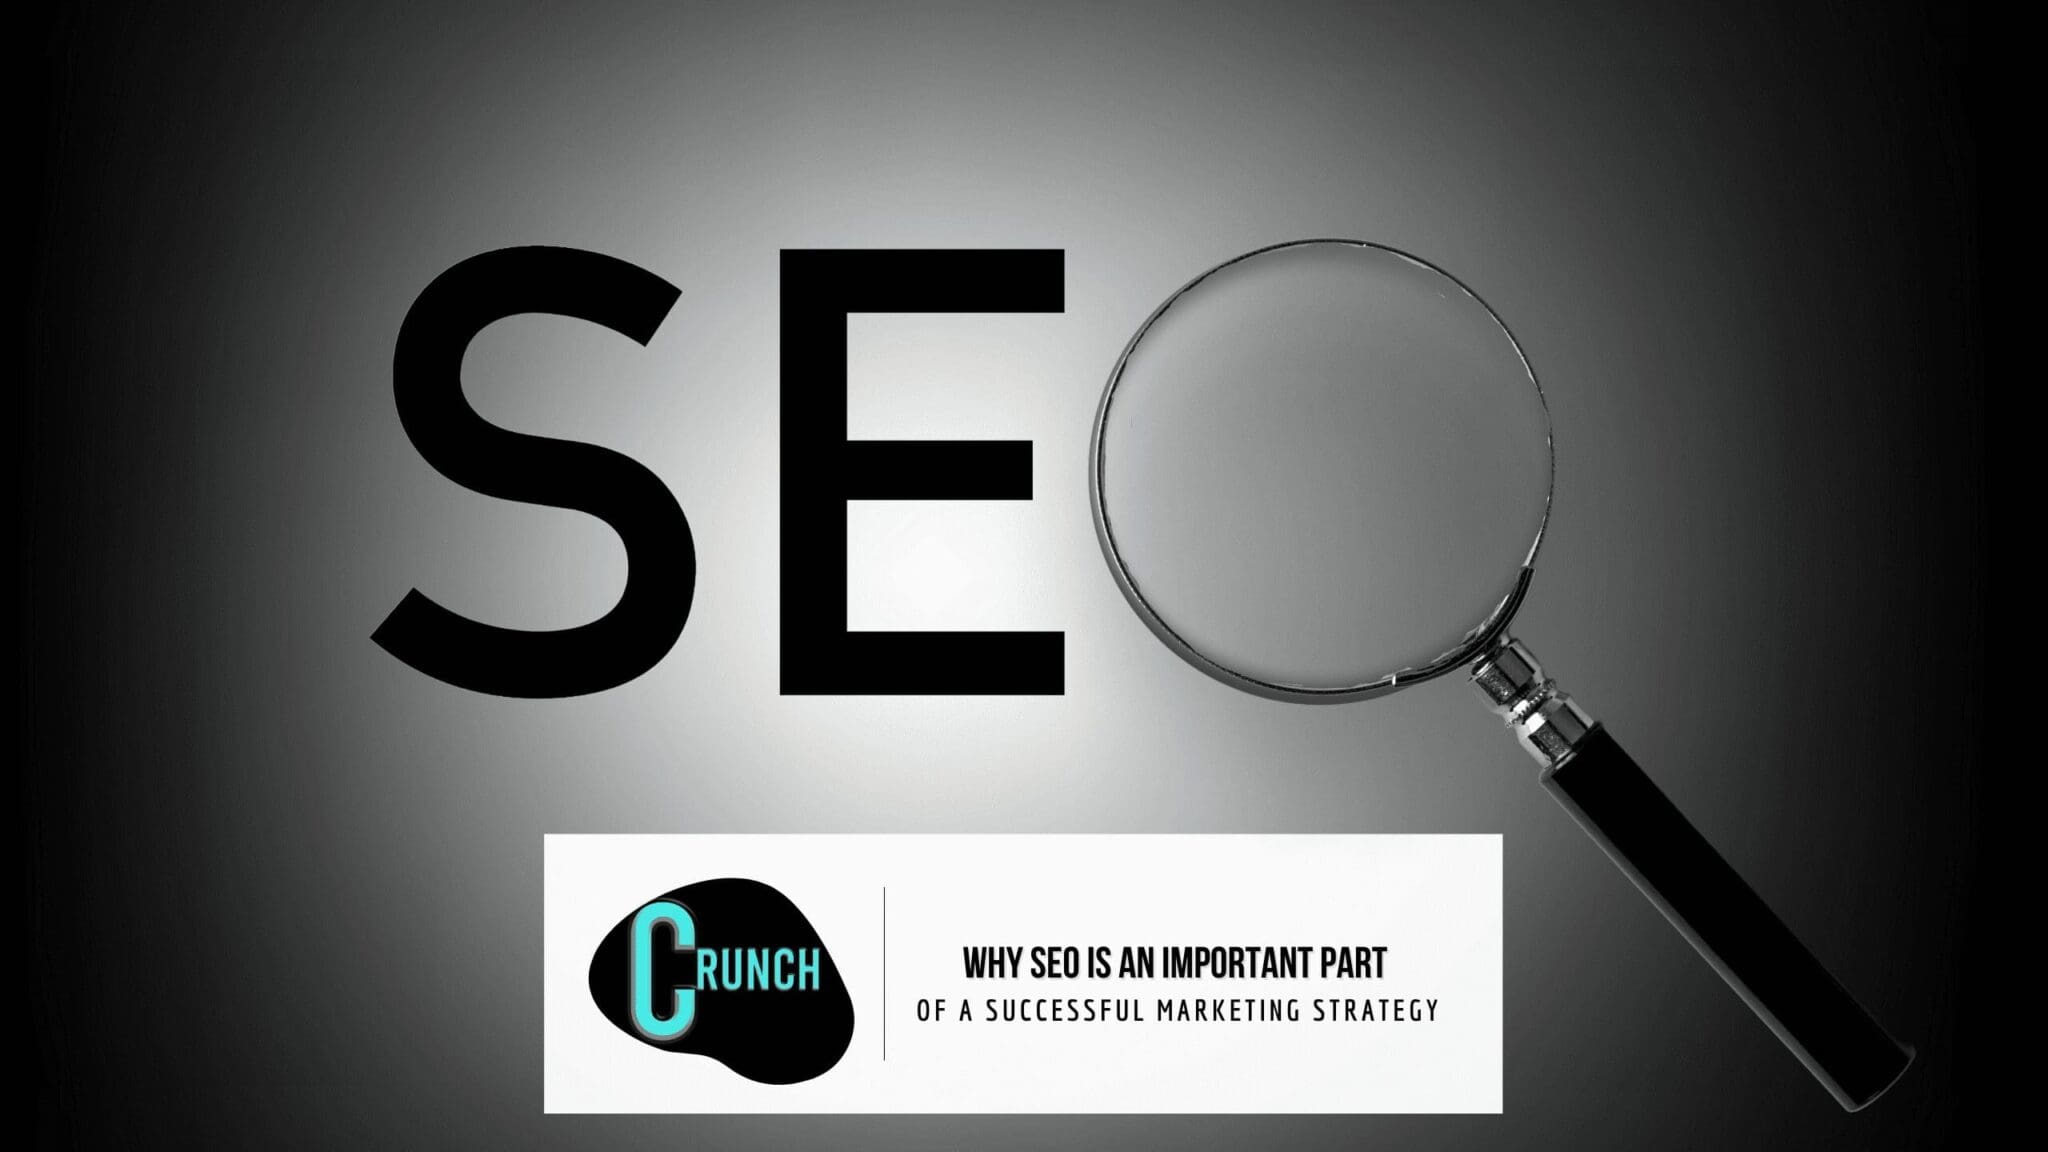 Why SEO is an important part of a successful digital marketing strategy